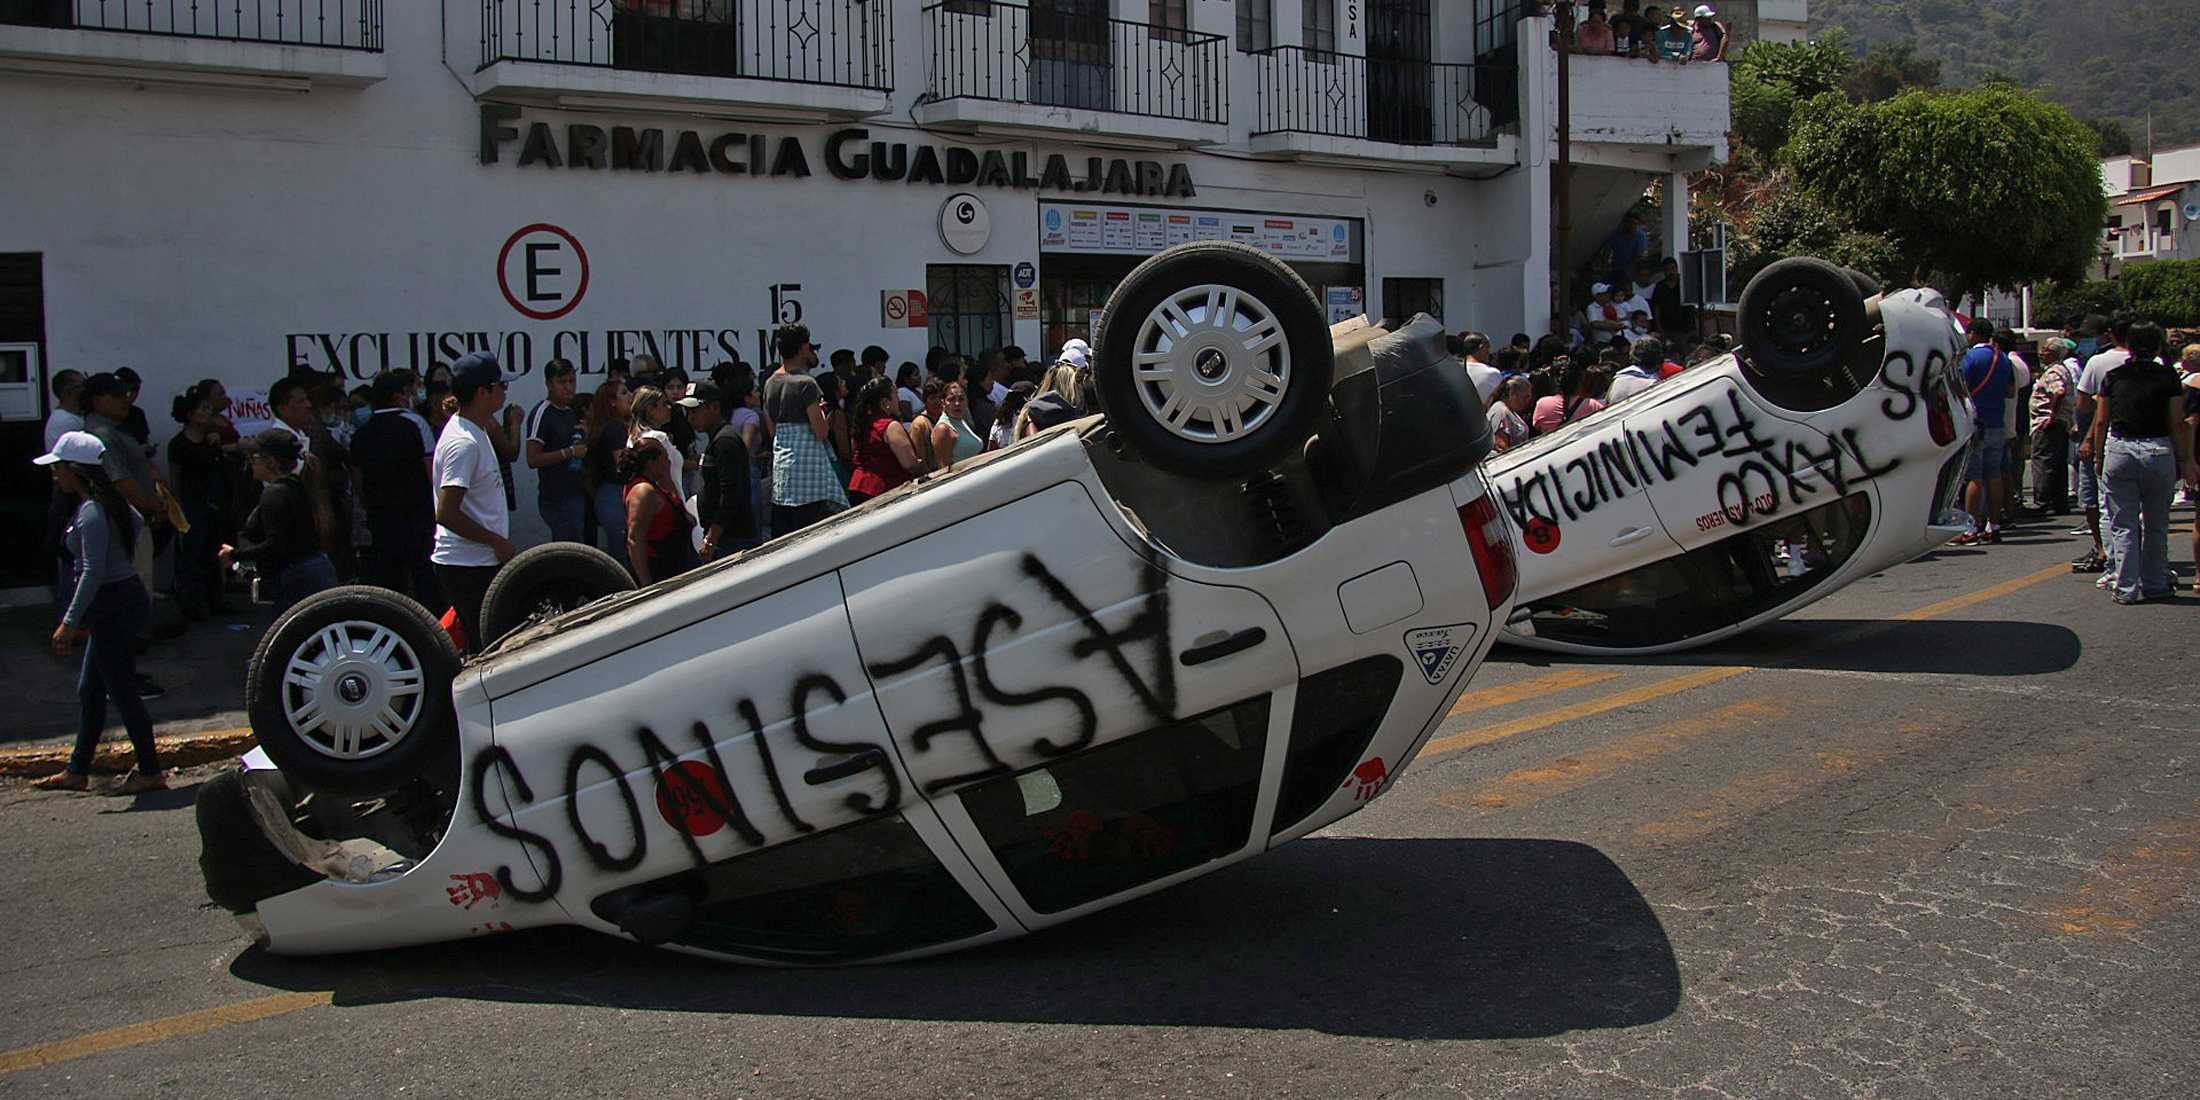 Two cars lie upside down on the road and are spray-painted with words like "Asesinos". Civilians are recognizable in the background.